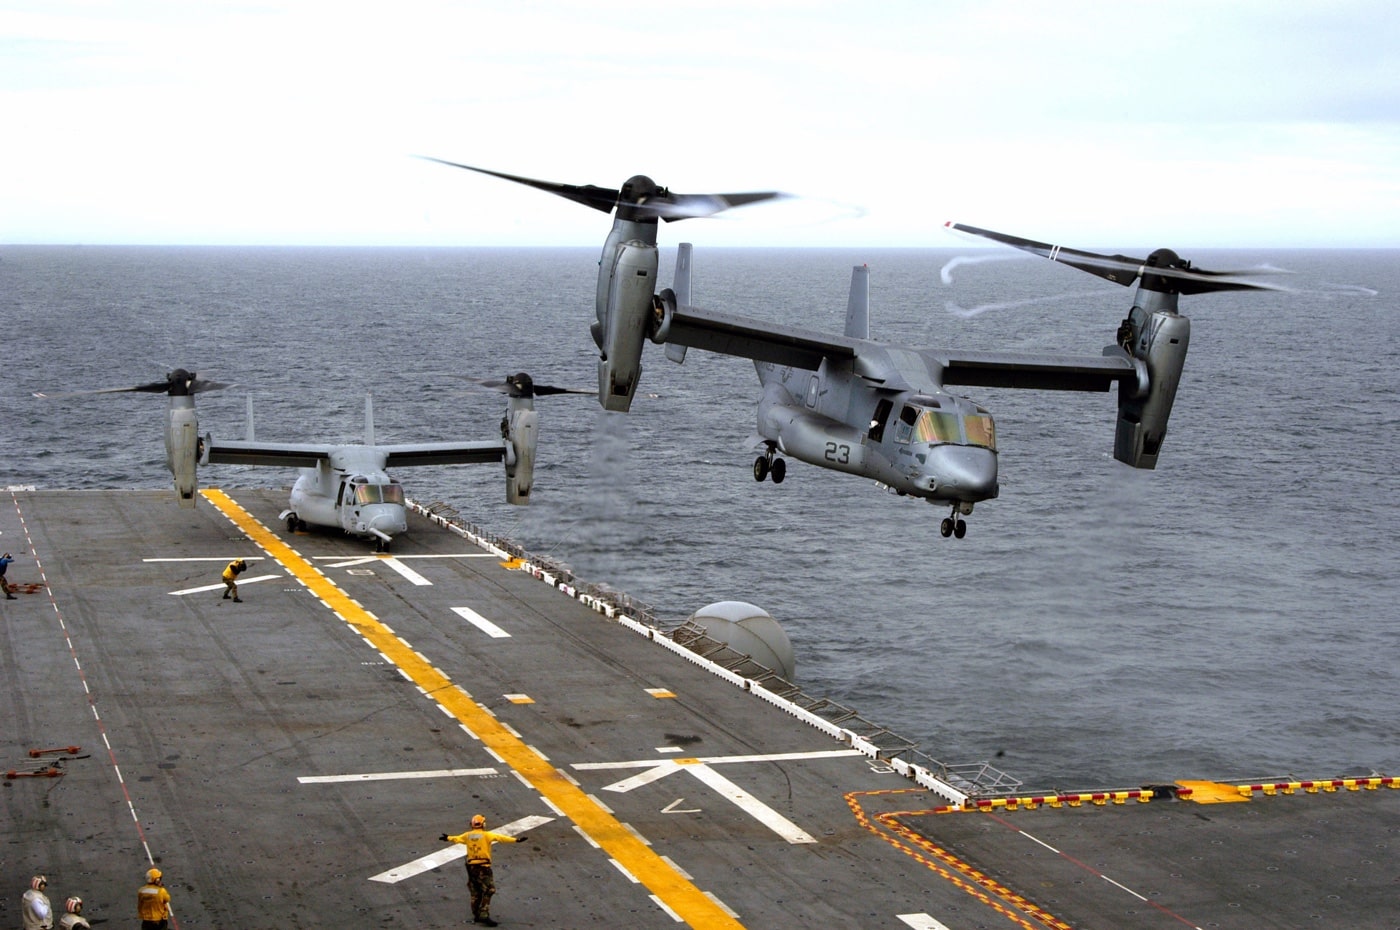 V-22 Osprey takes off from USS Wasp LHD-1